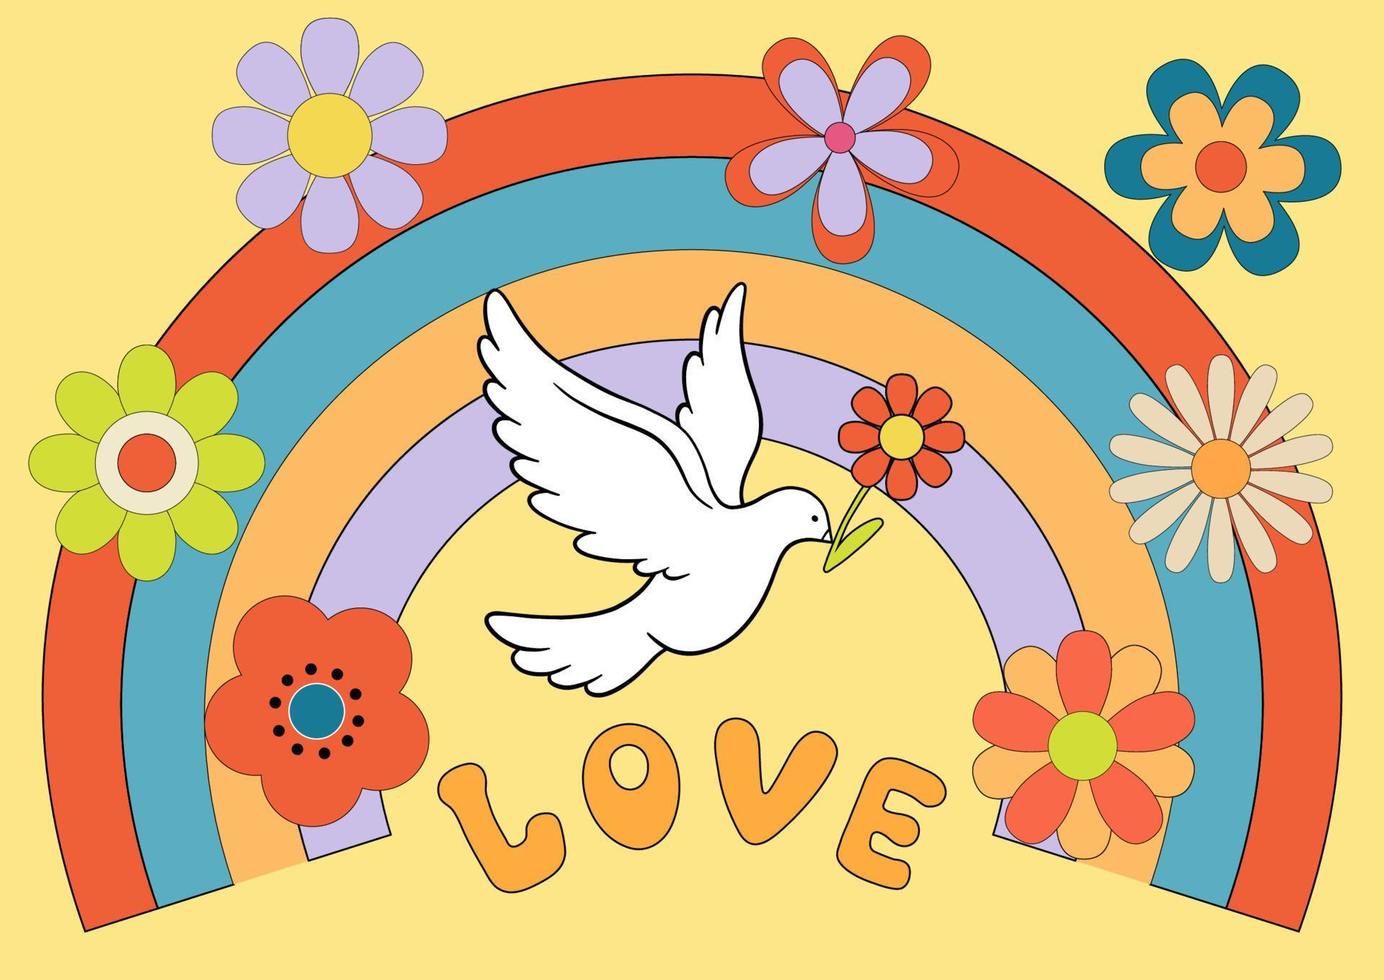 Groovy poster 70s with dove of peace. Retro print with hippie elements. Cartoon psychedelic landscape with hippy flowers daisy and rainbow vector